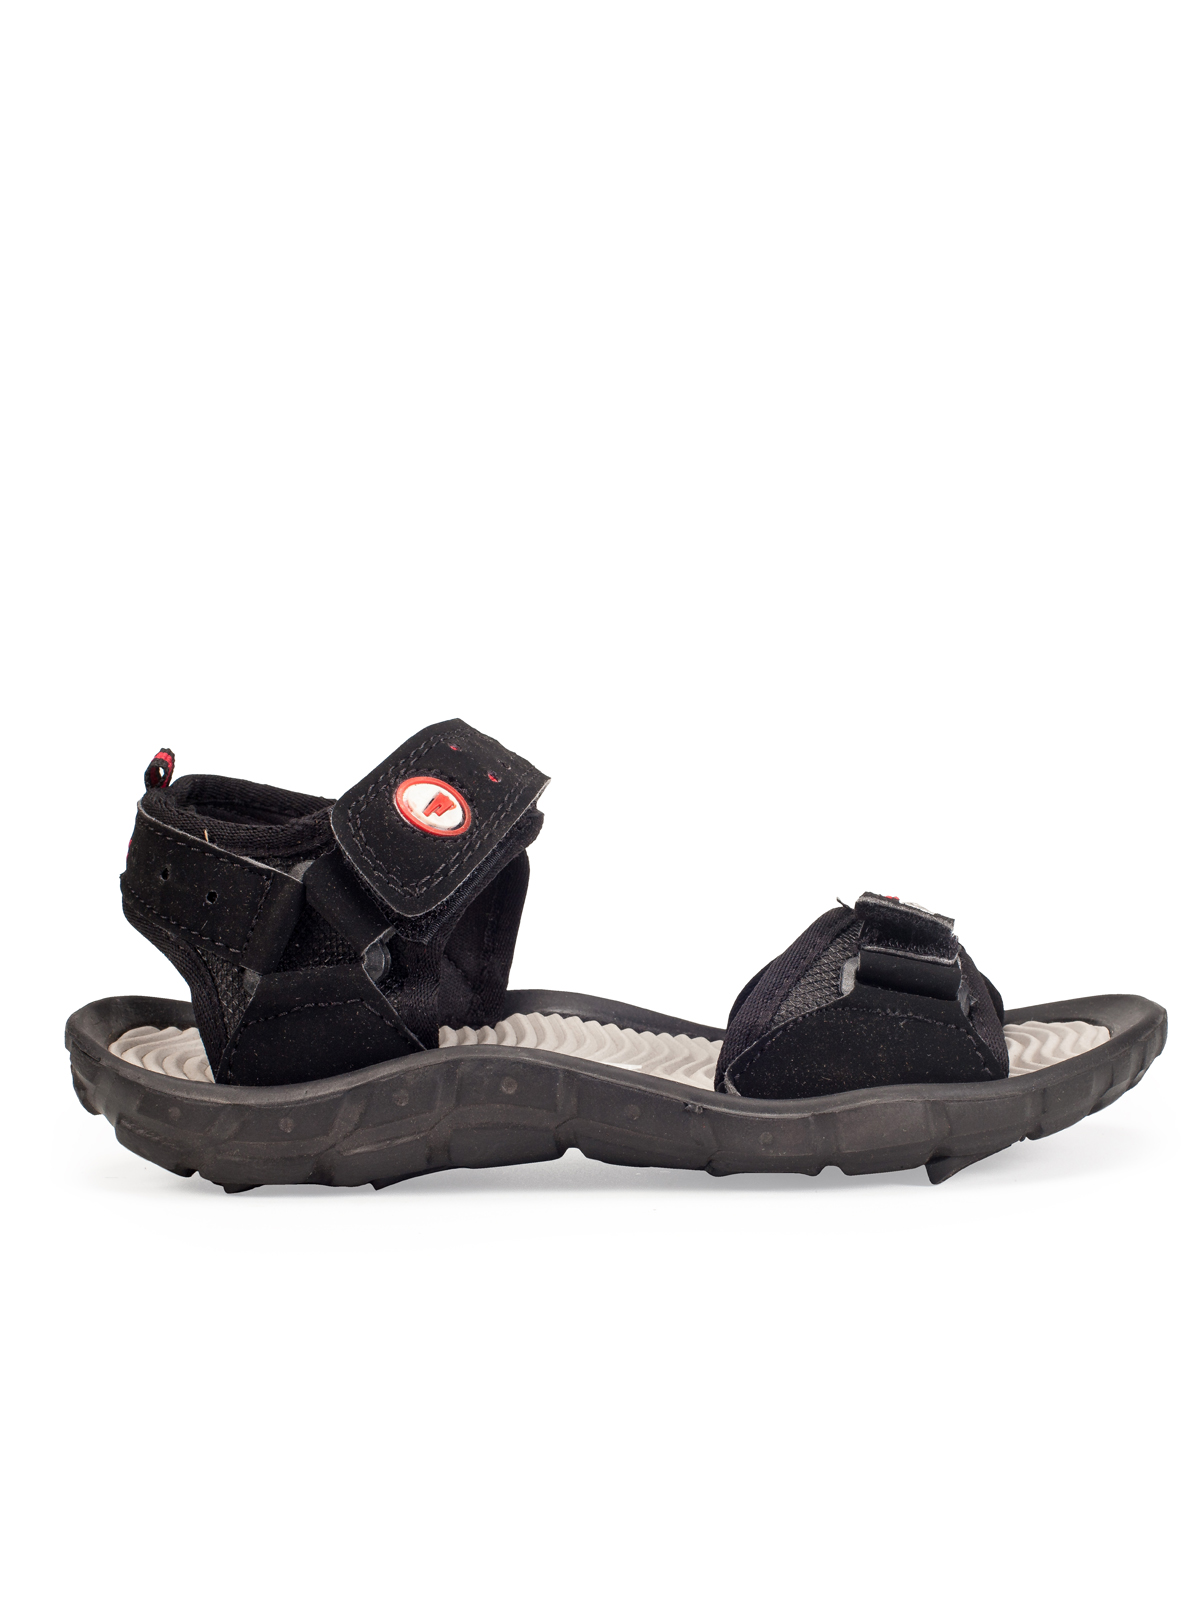 Buy Khadims Pro Black Floaters Sandals Online @ ₹379 from ShopClues